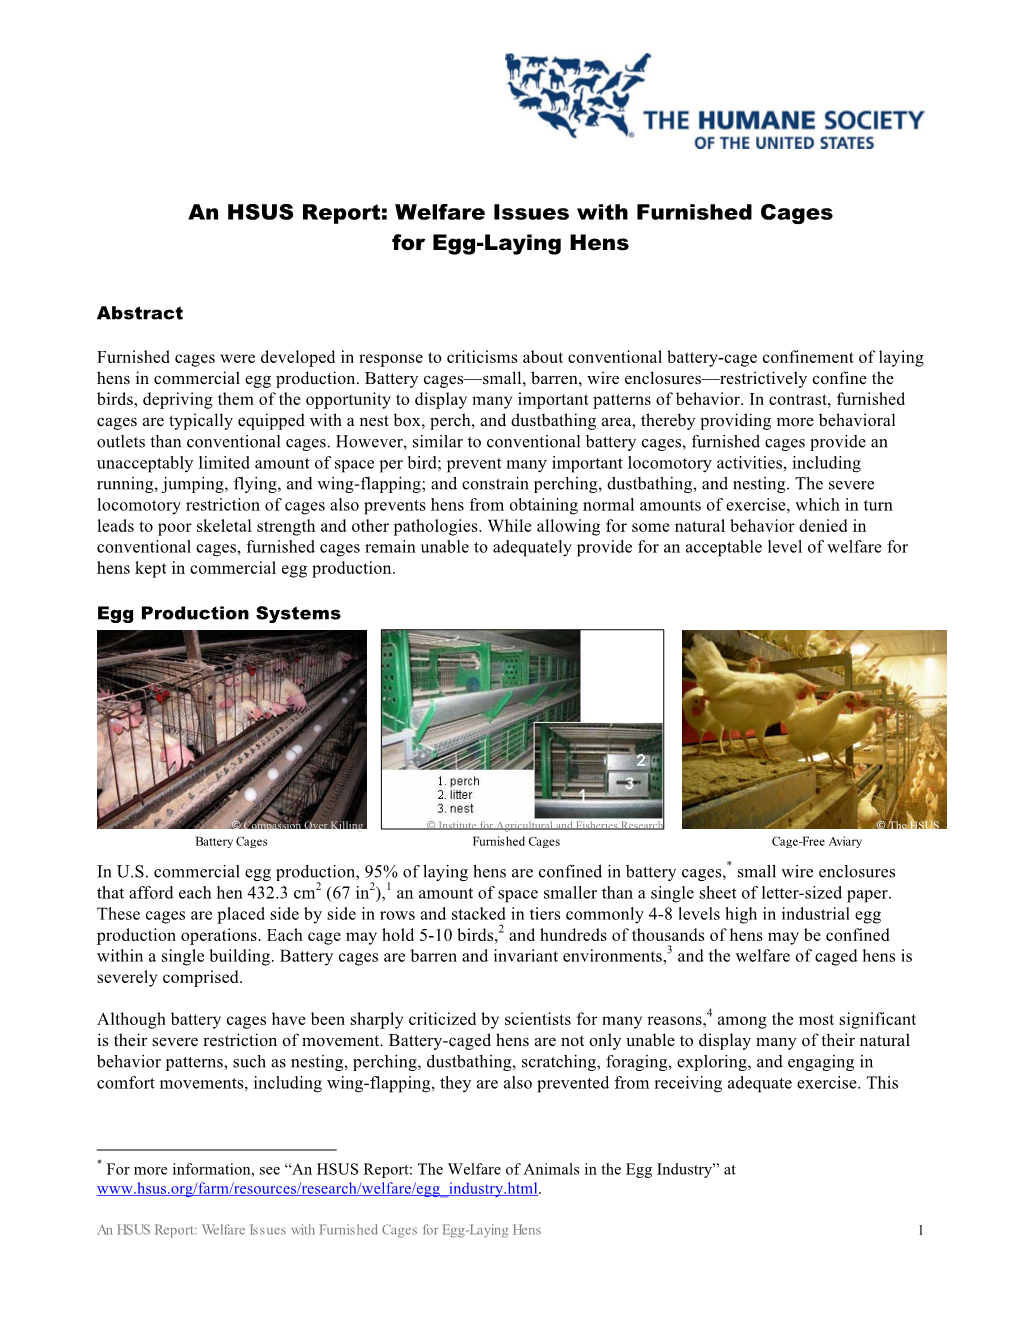 An HSUS Report: Welfare Issues with Furnished Cages for Egg-Laying Hens